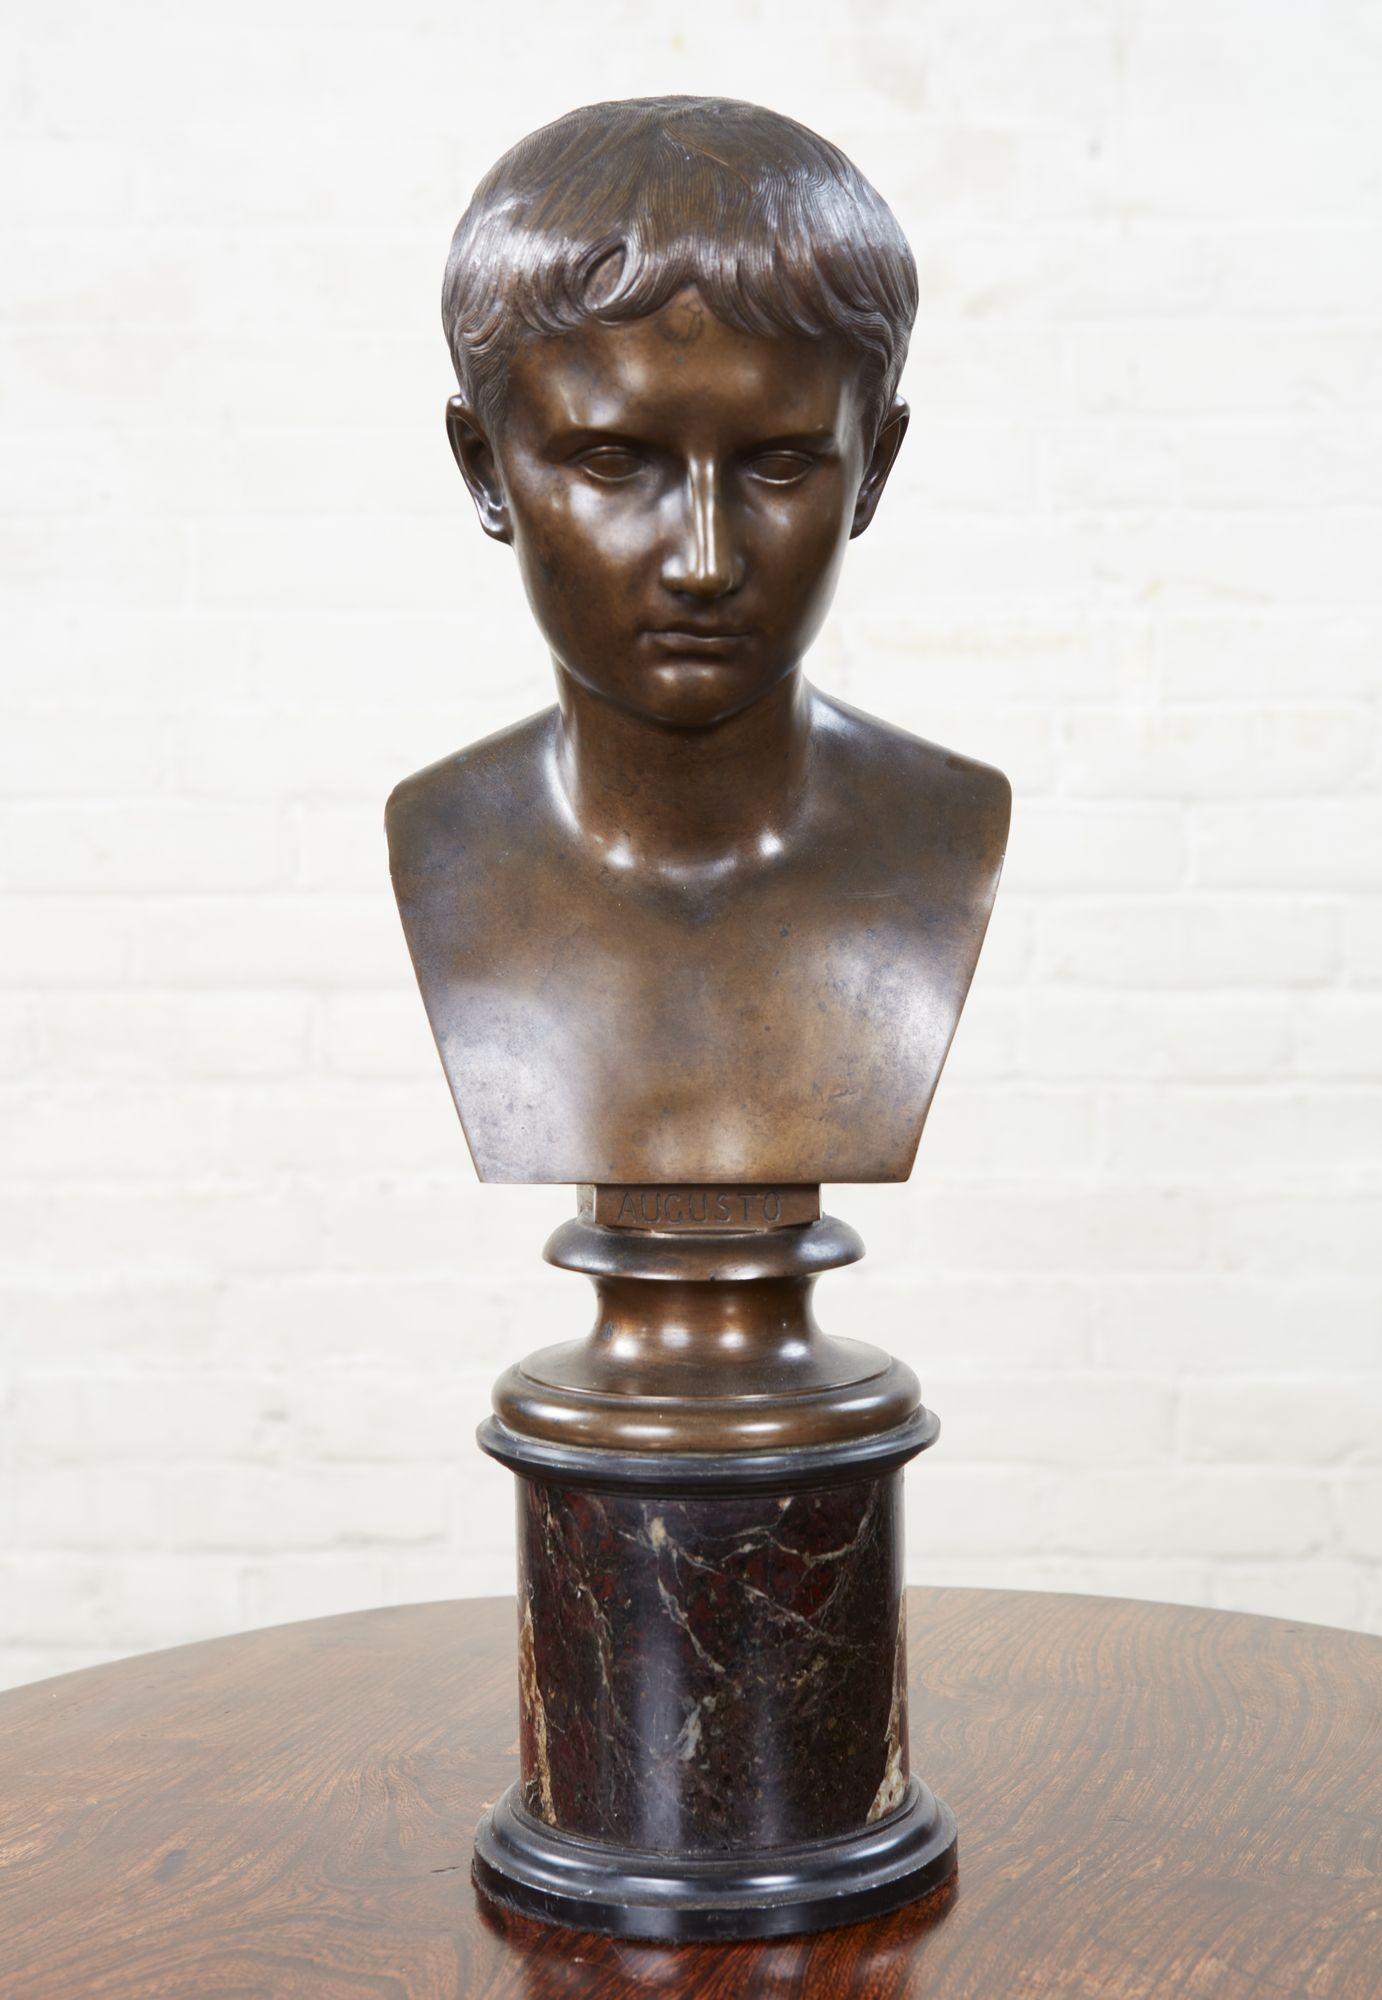 Italian 19th century bronze bust of Augustus Ceasar, finely detailed and well patinated, standing on turned ebonized wood and marble socle plinth base.